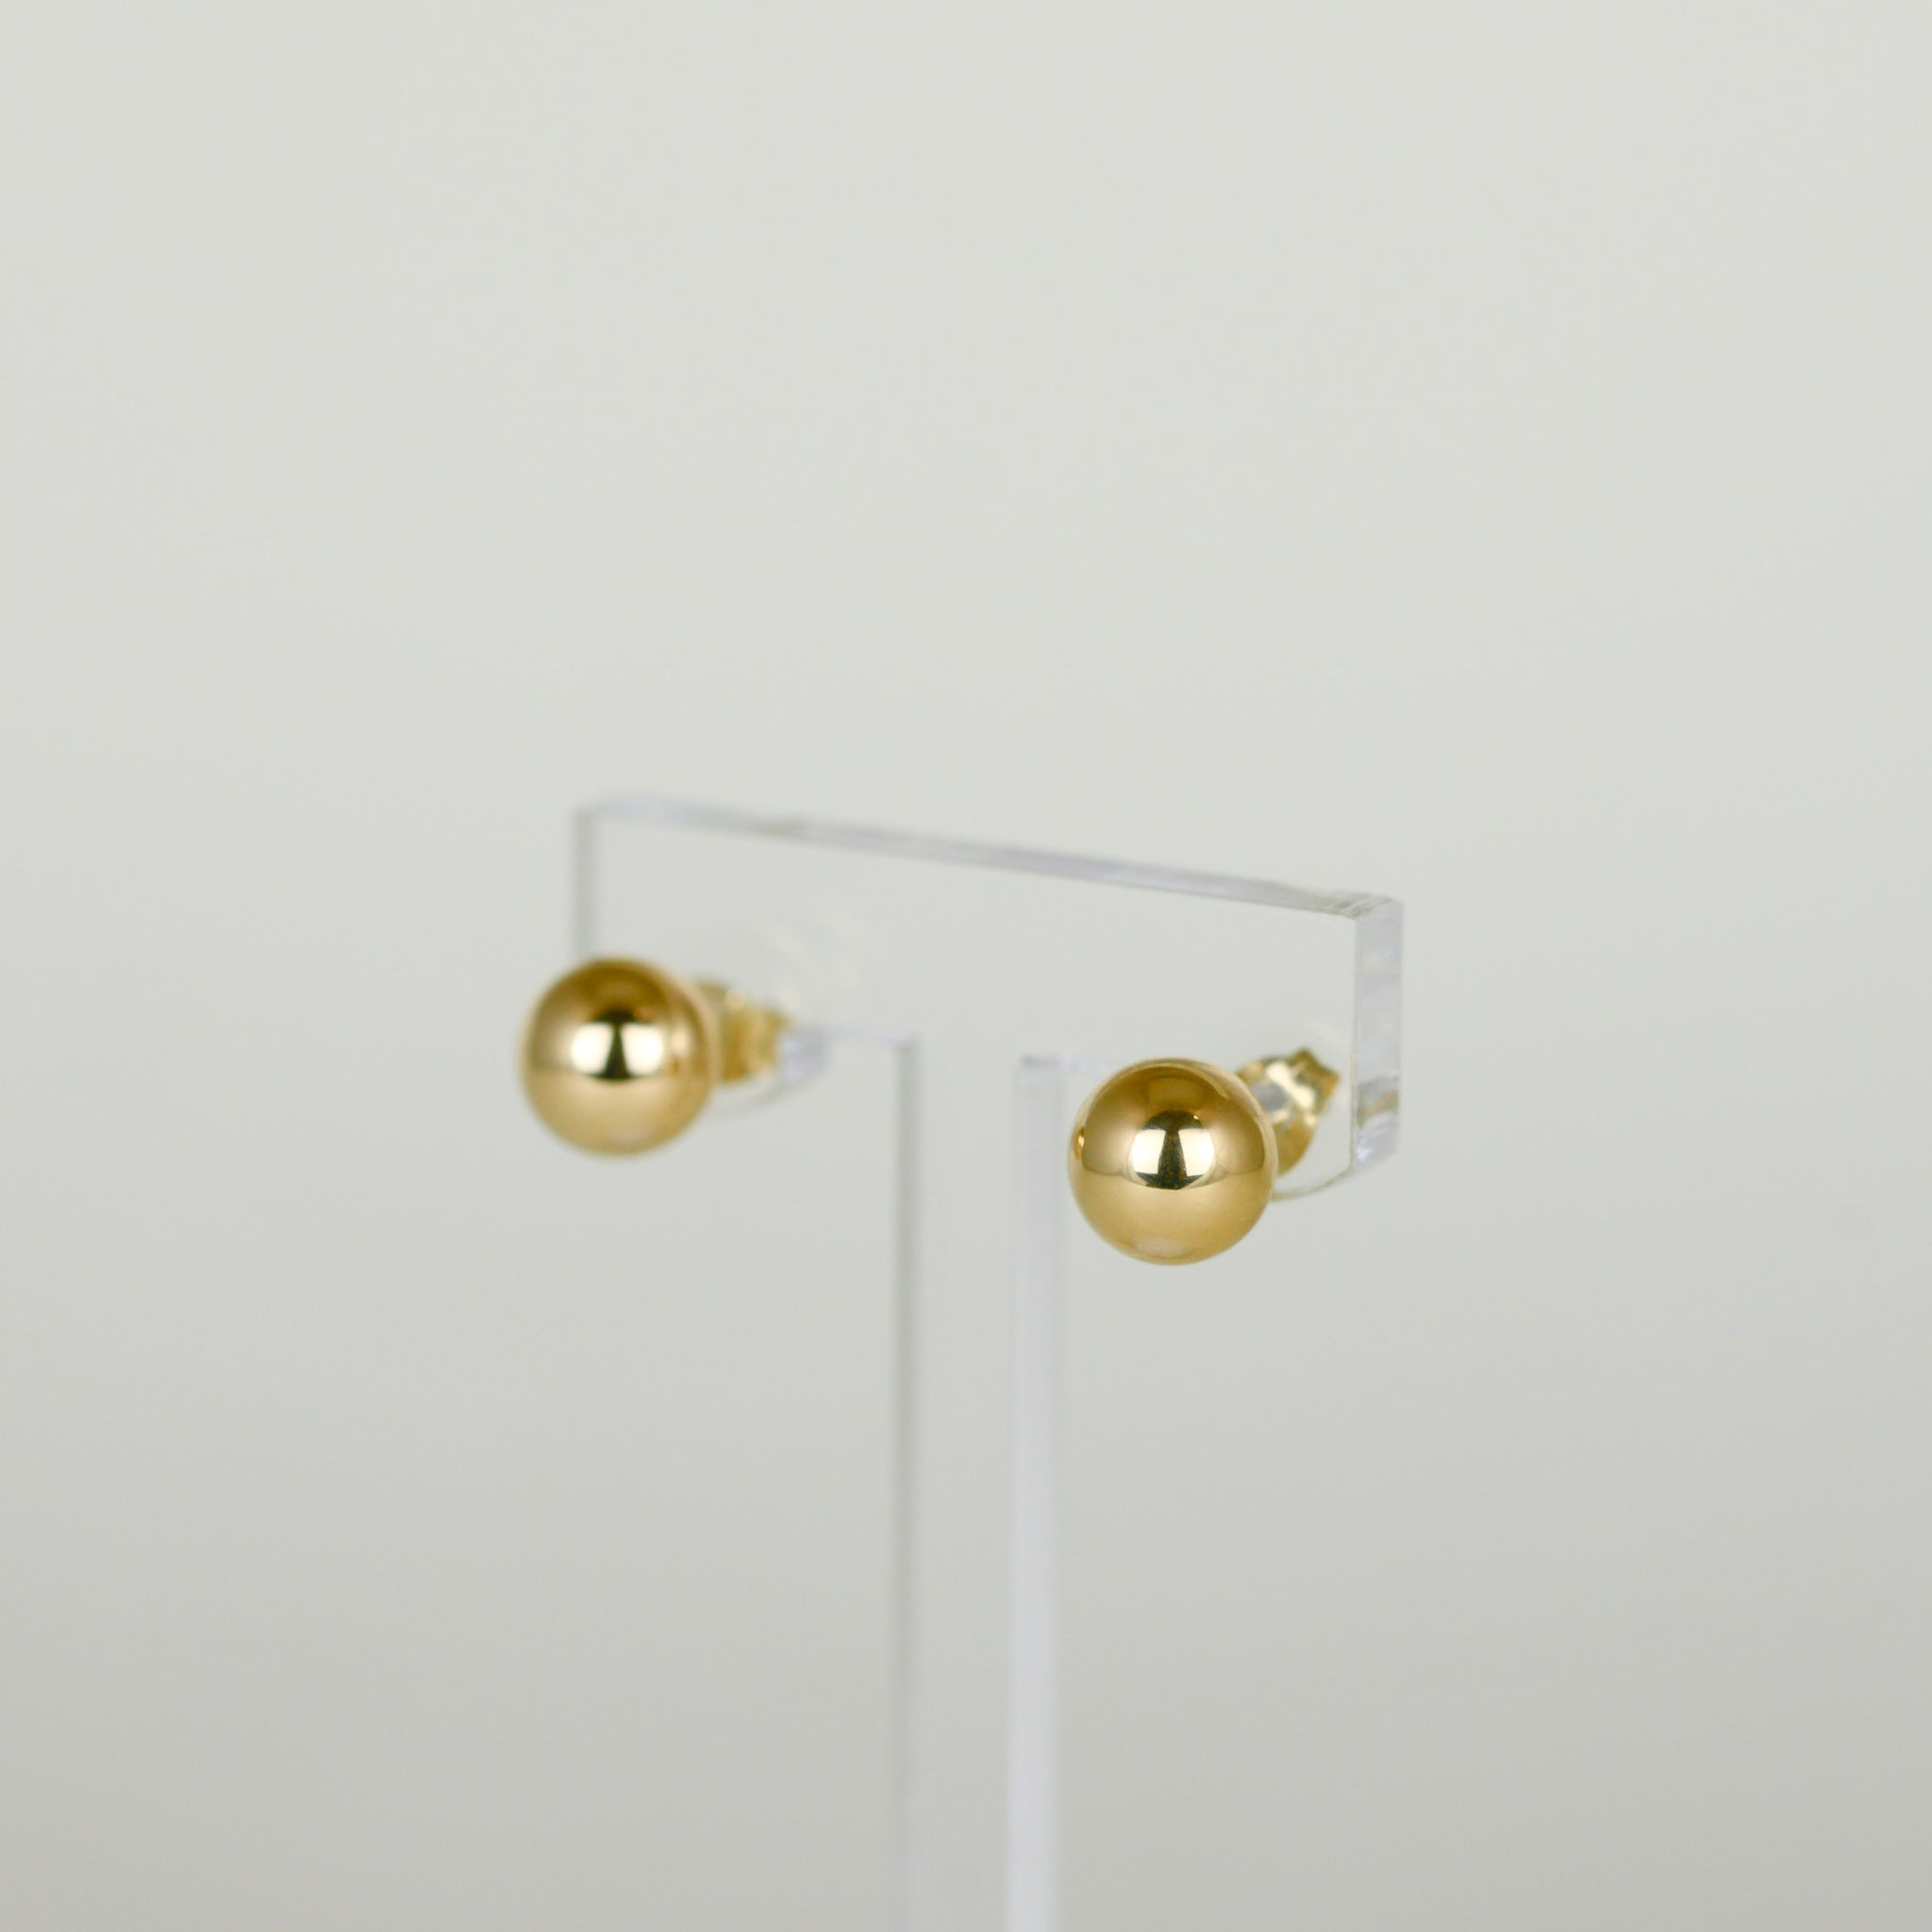 9ct Yellow Gold 8mm Hollow Ball Stud Earrings